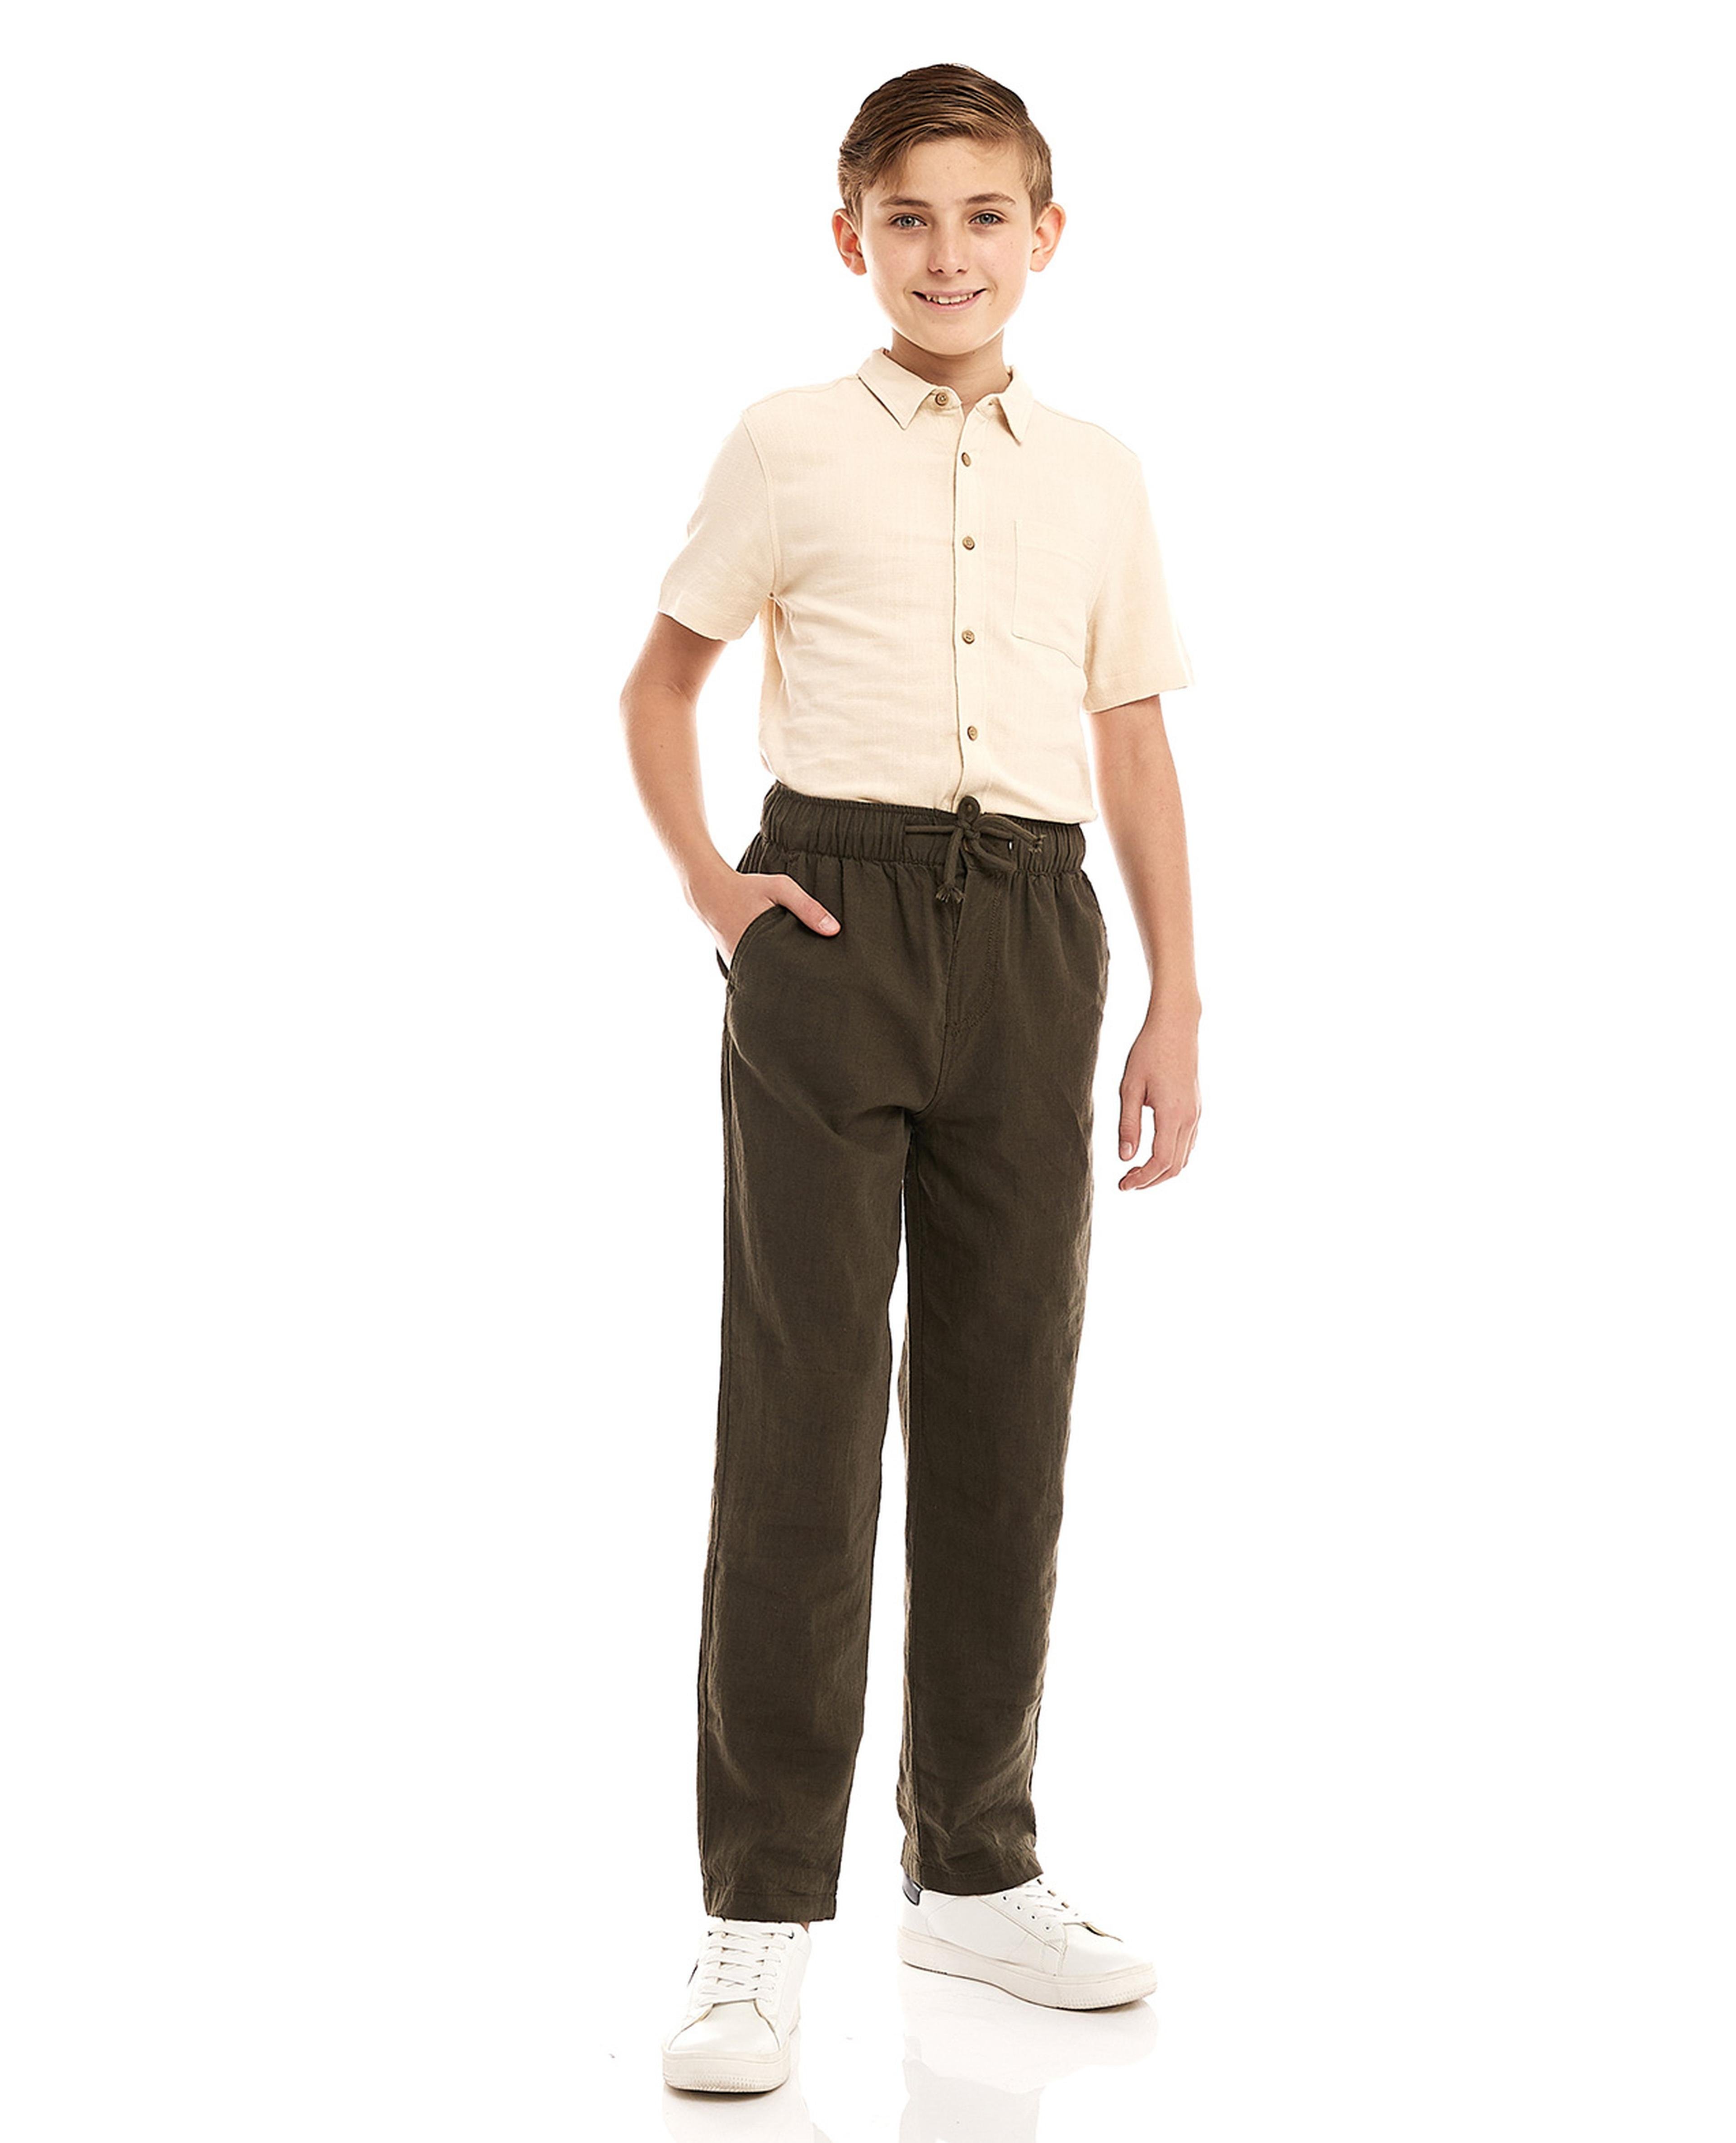 Woven Pants with Drawstring Waist